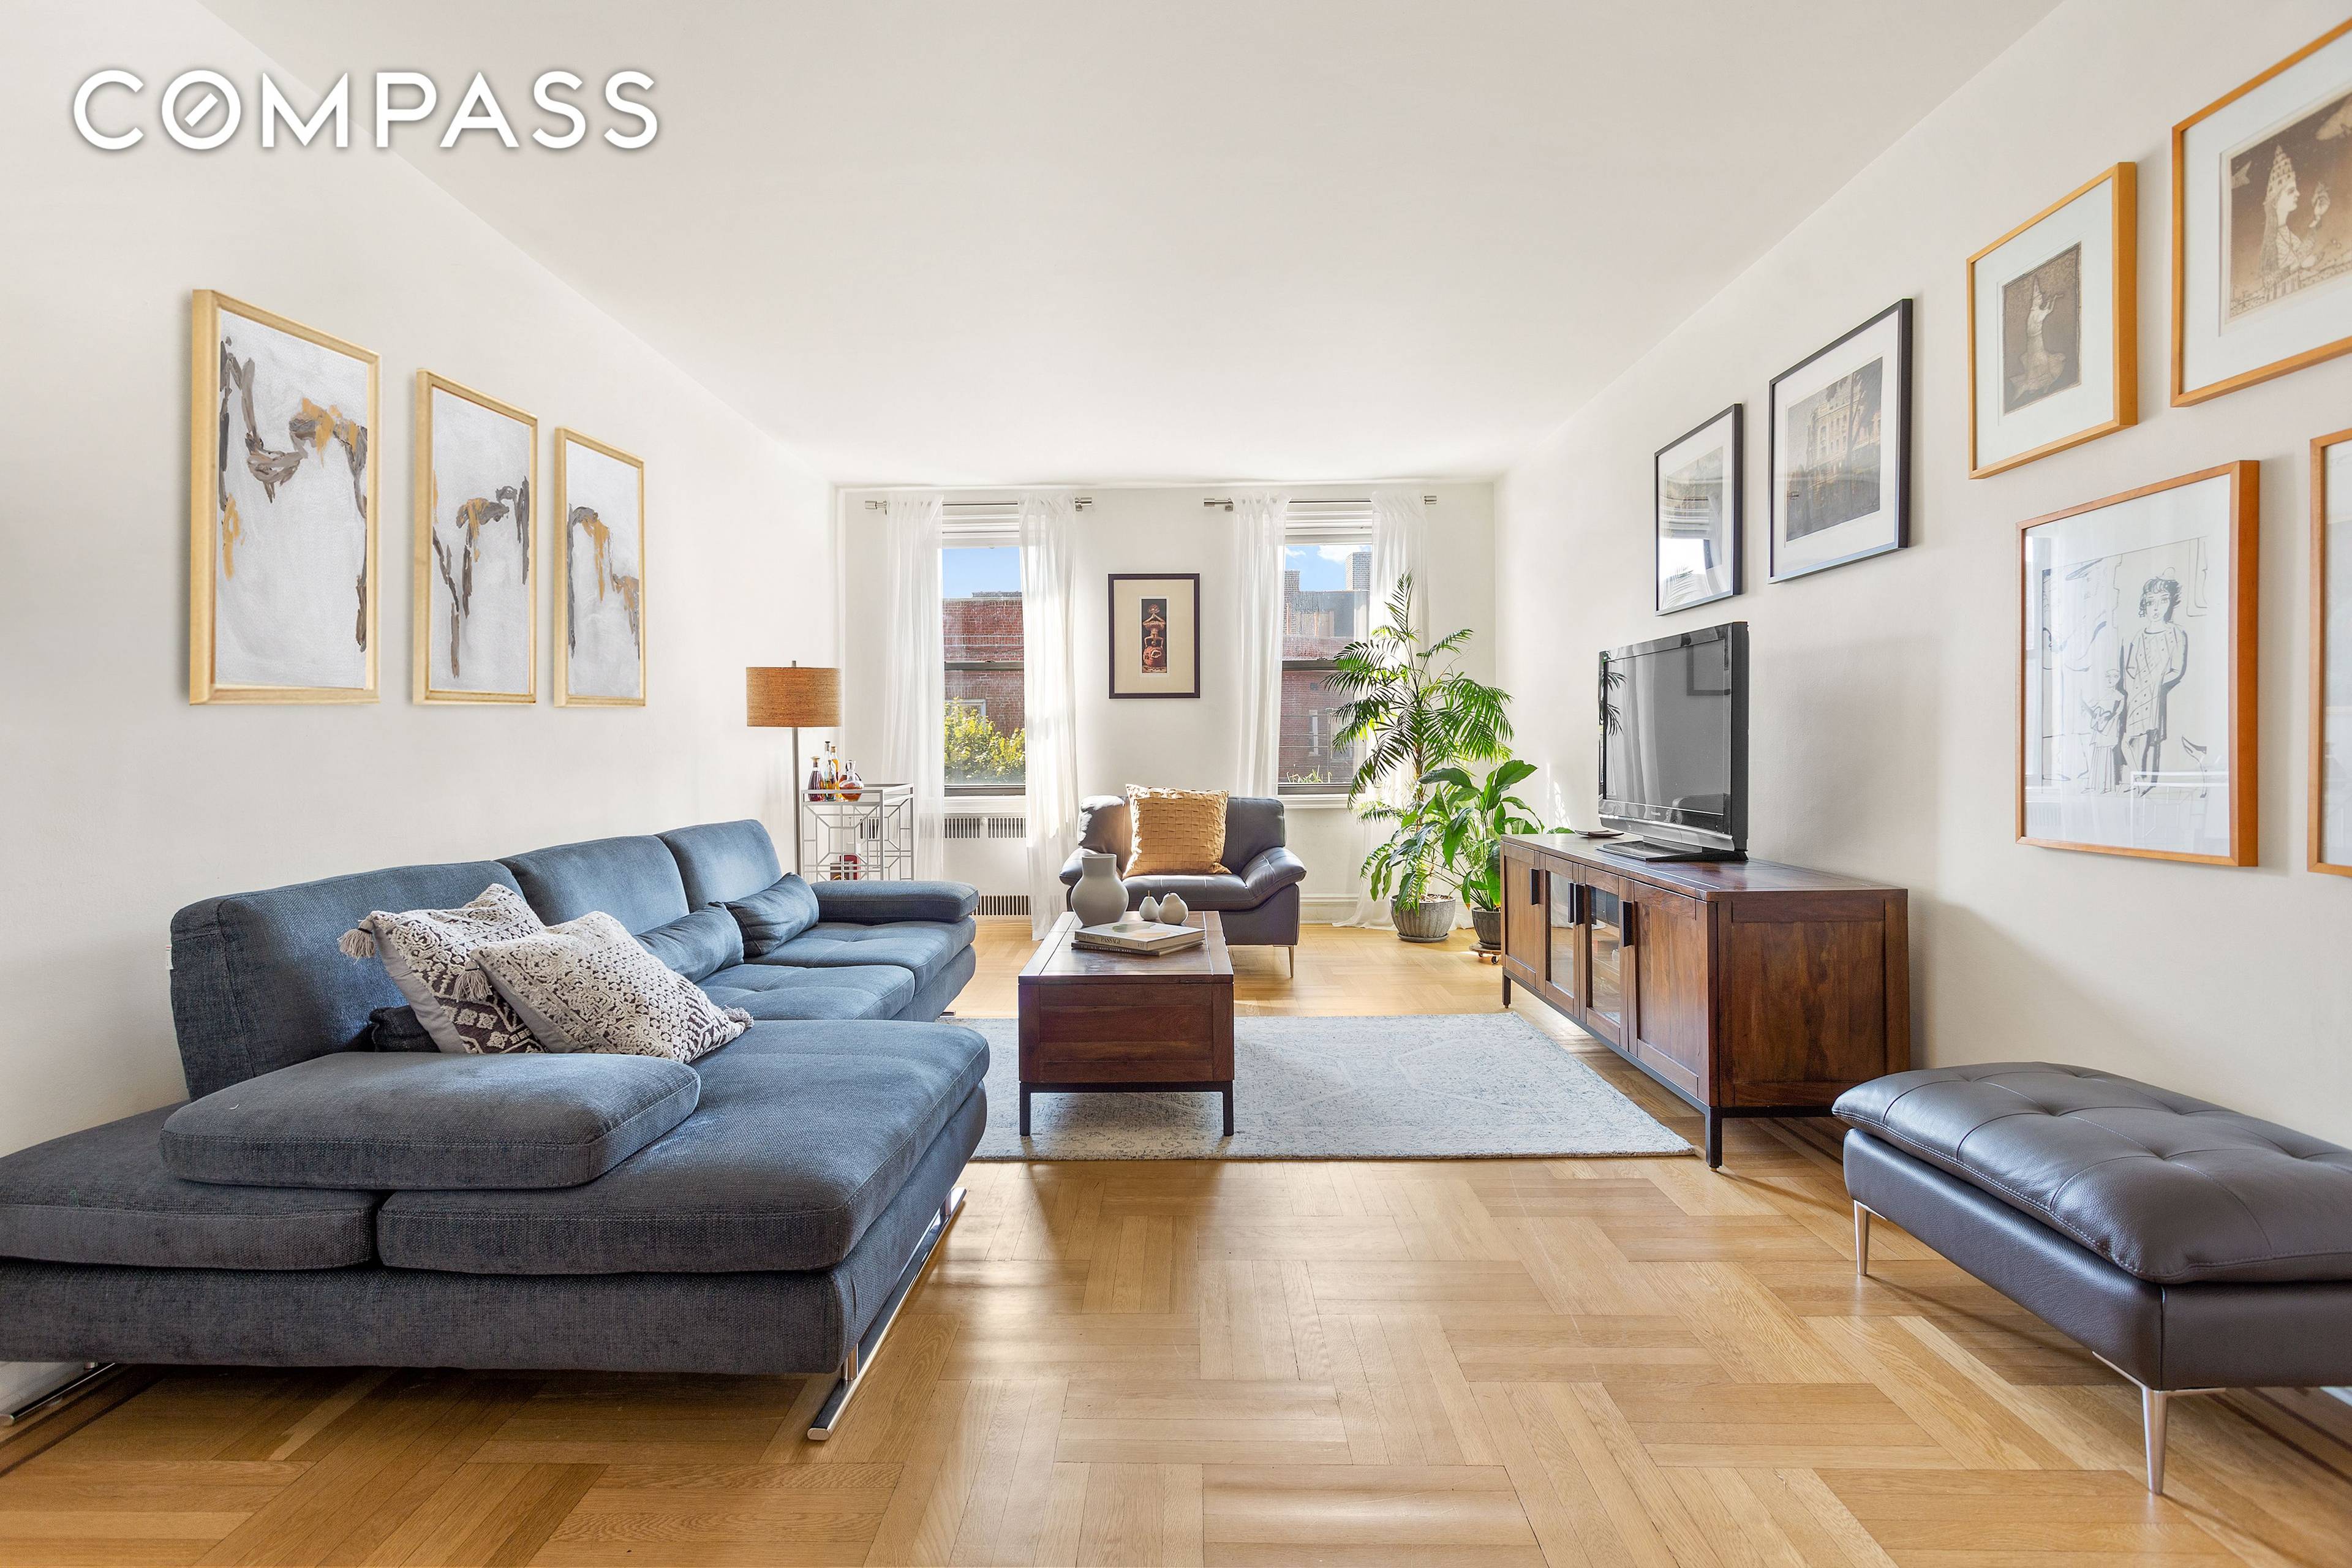 This stunning, sun drenched three bedroom, two bath co op in a gorgeous Windso Terrace Art Deco building two blocks from Prospect Park will make your heart sing.